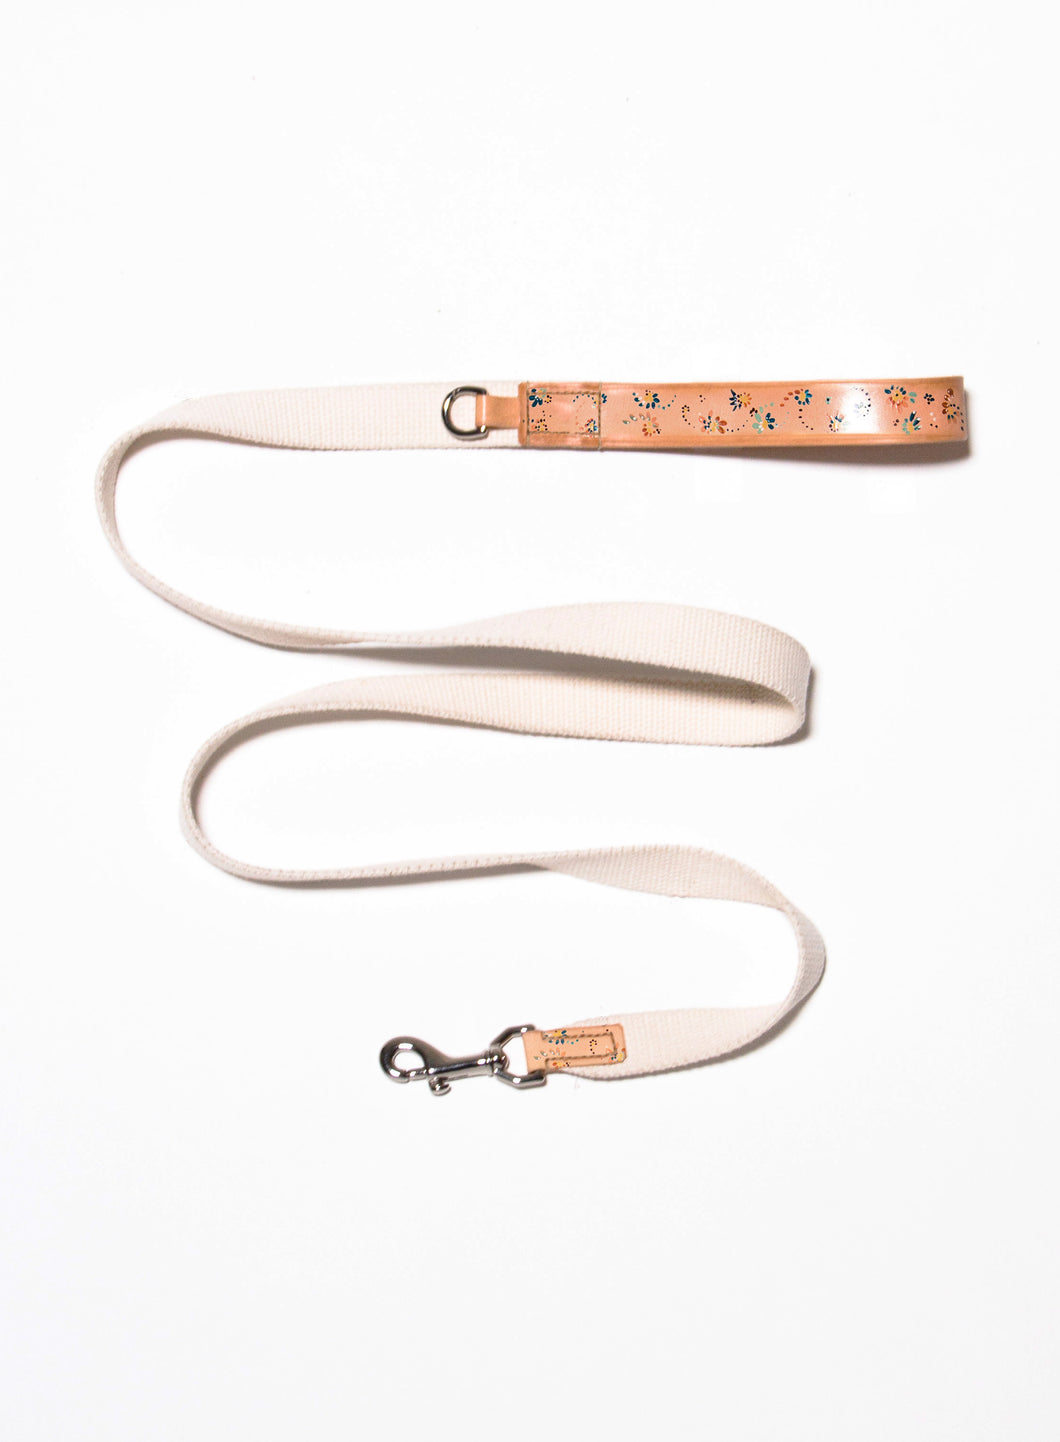 Hand Painted Leather Dog Leash